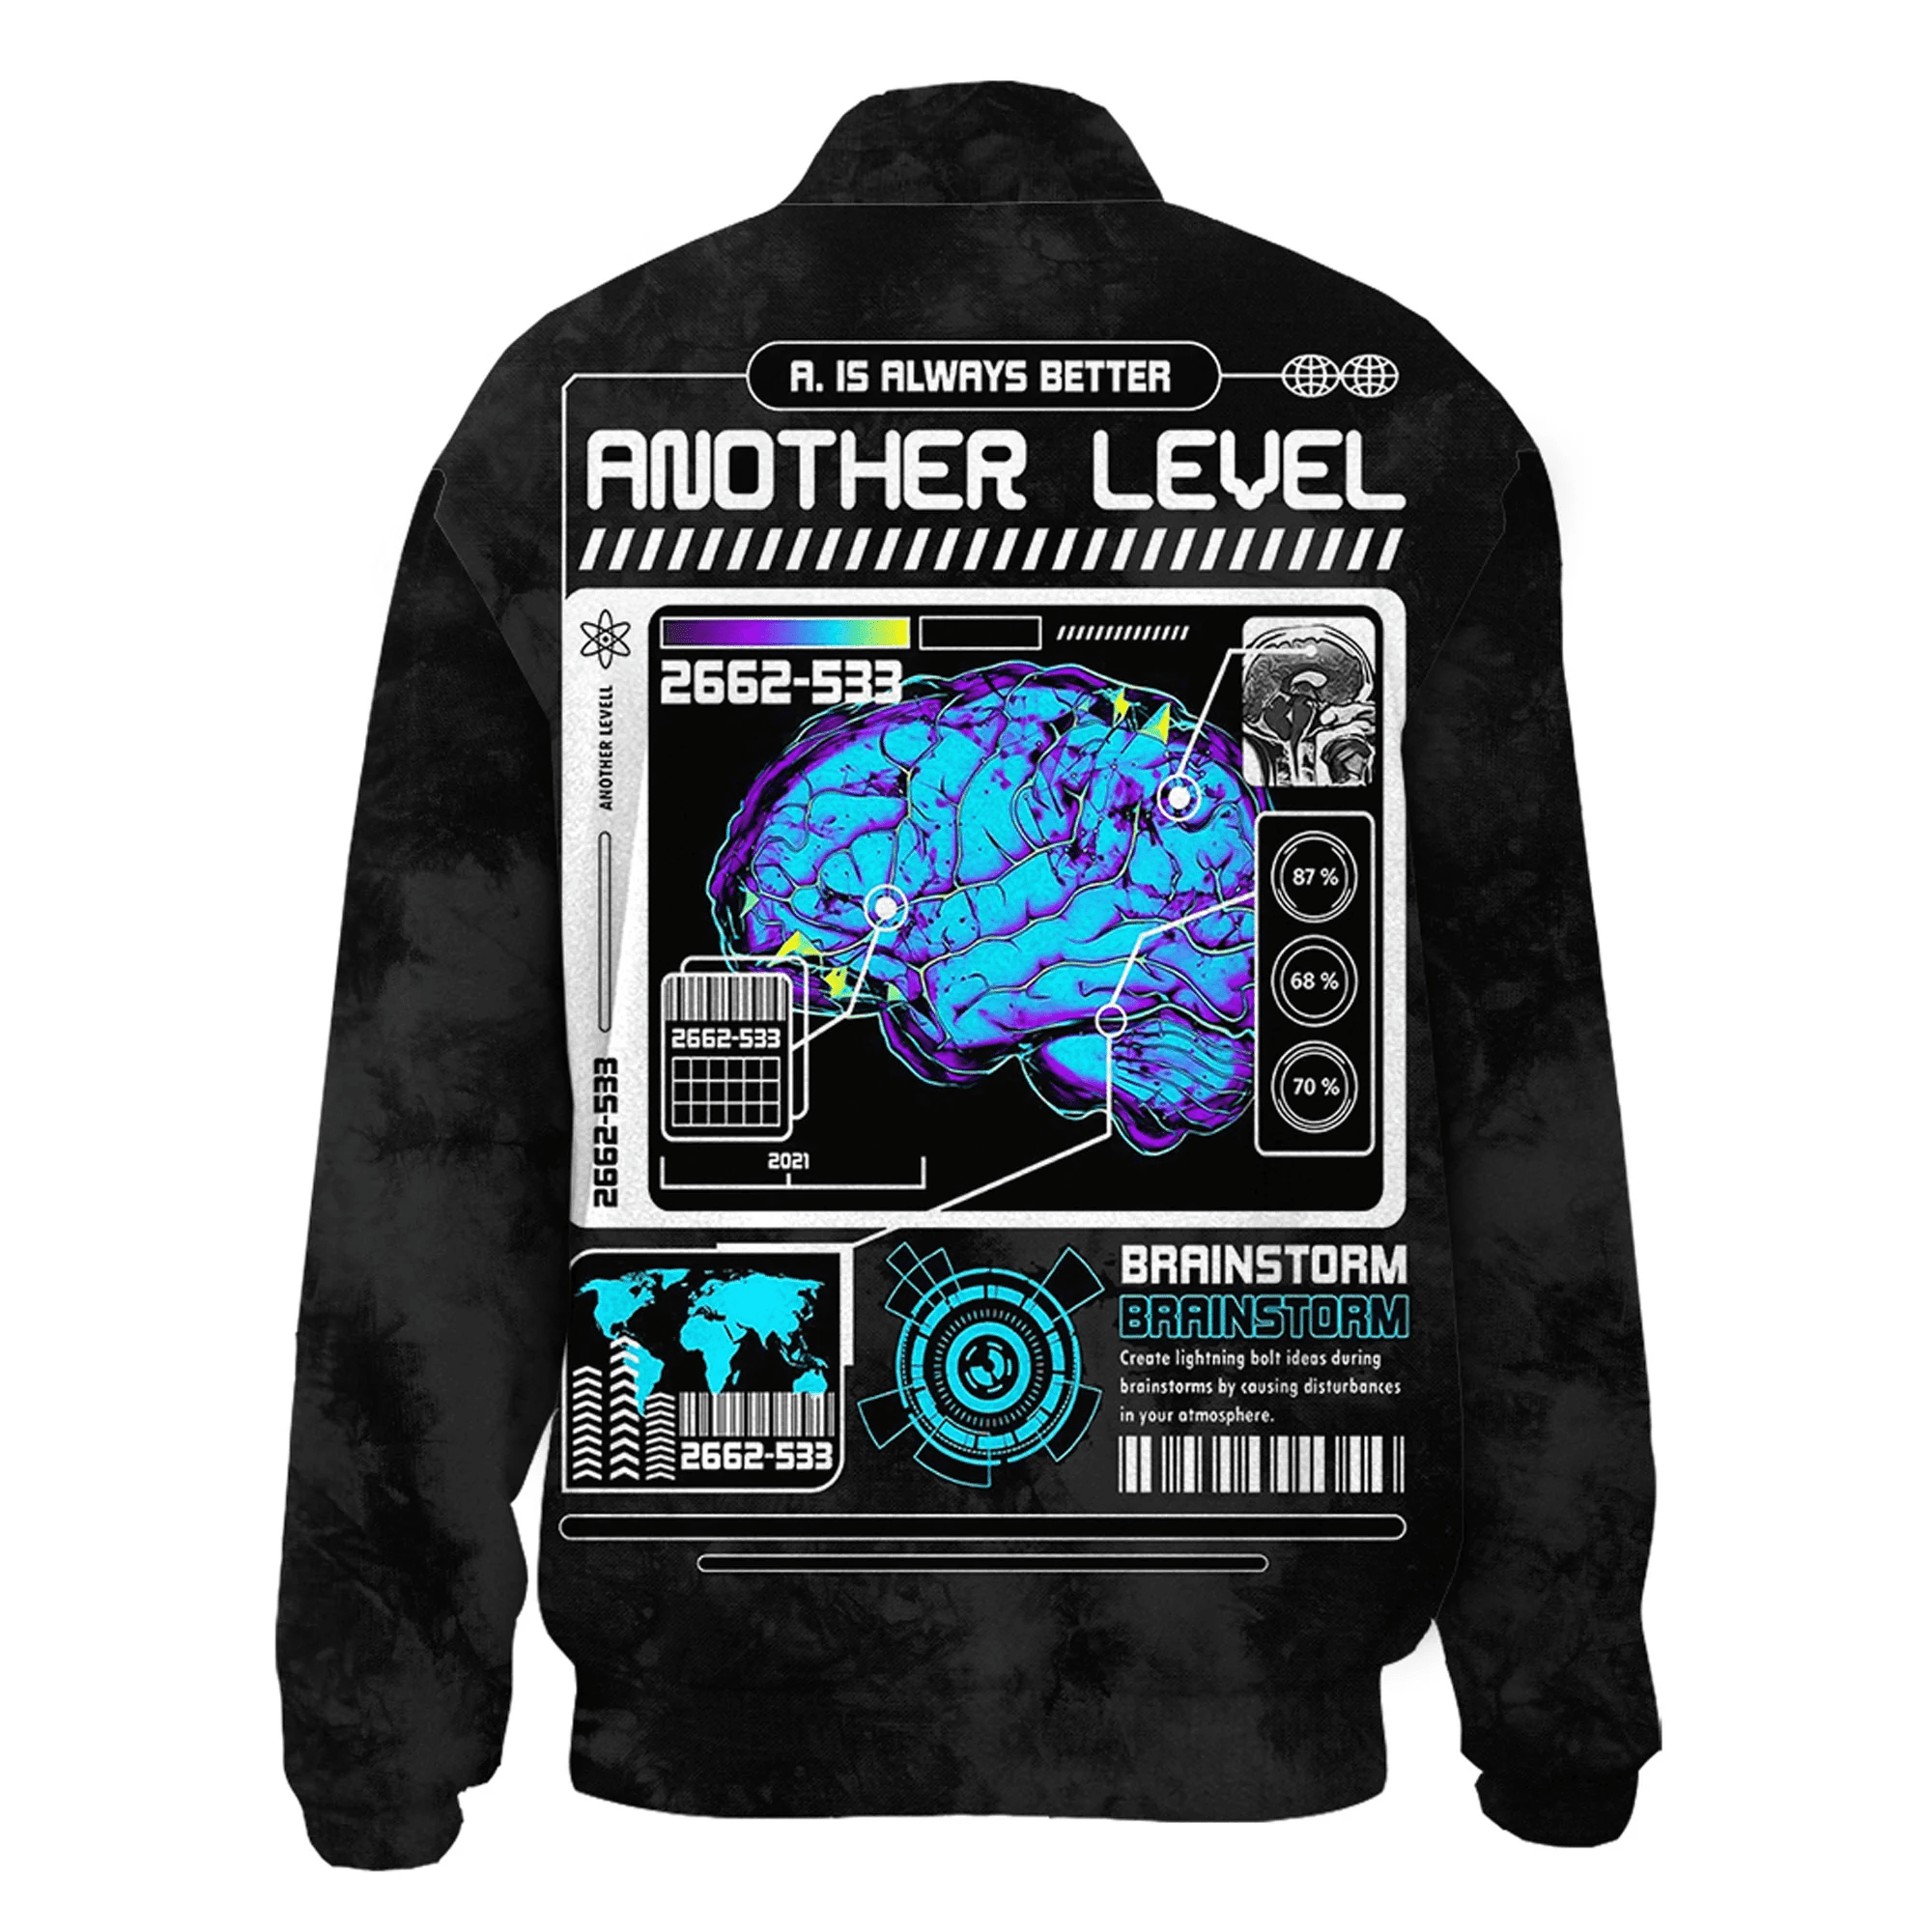 1sttheworld Clothing - Another Level - Thicken Stand-Collar Jacket A7 | 1sttheworld